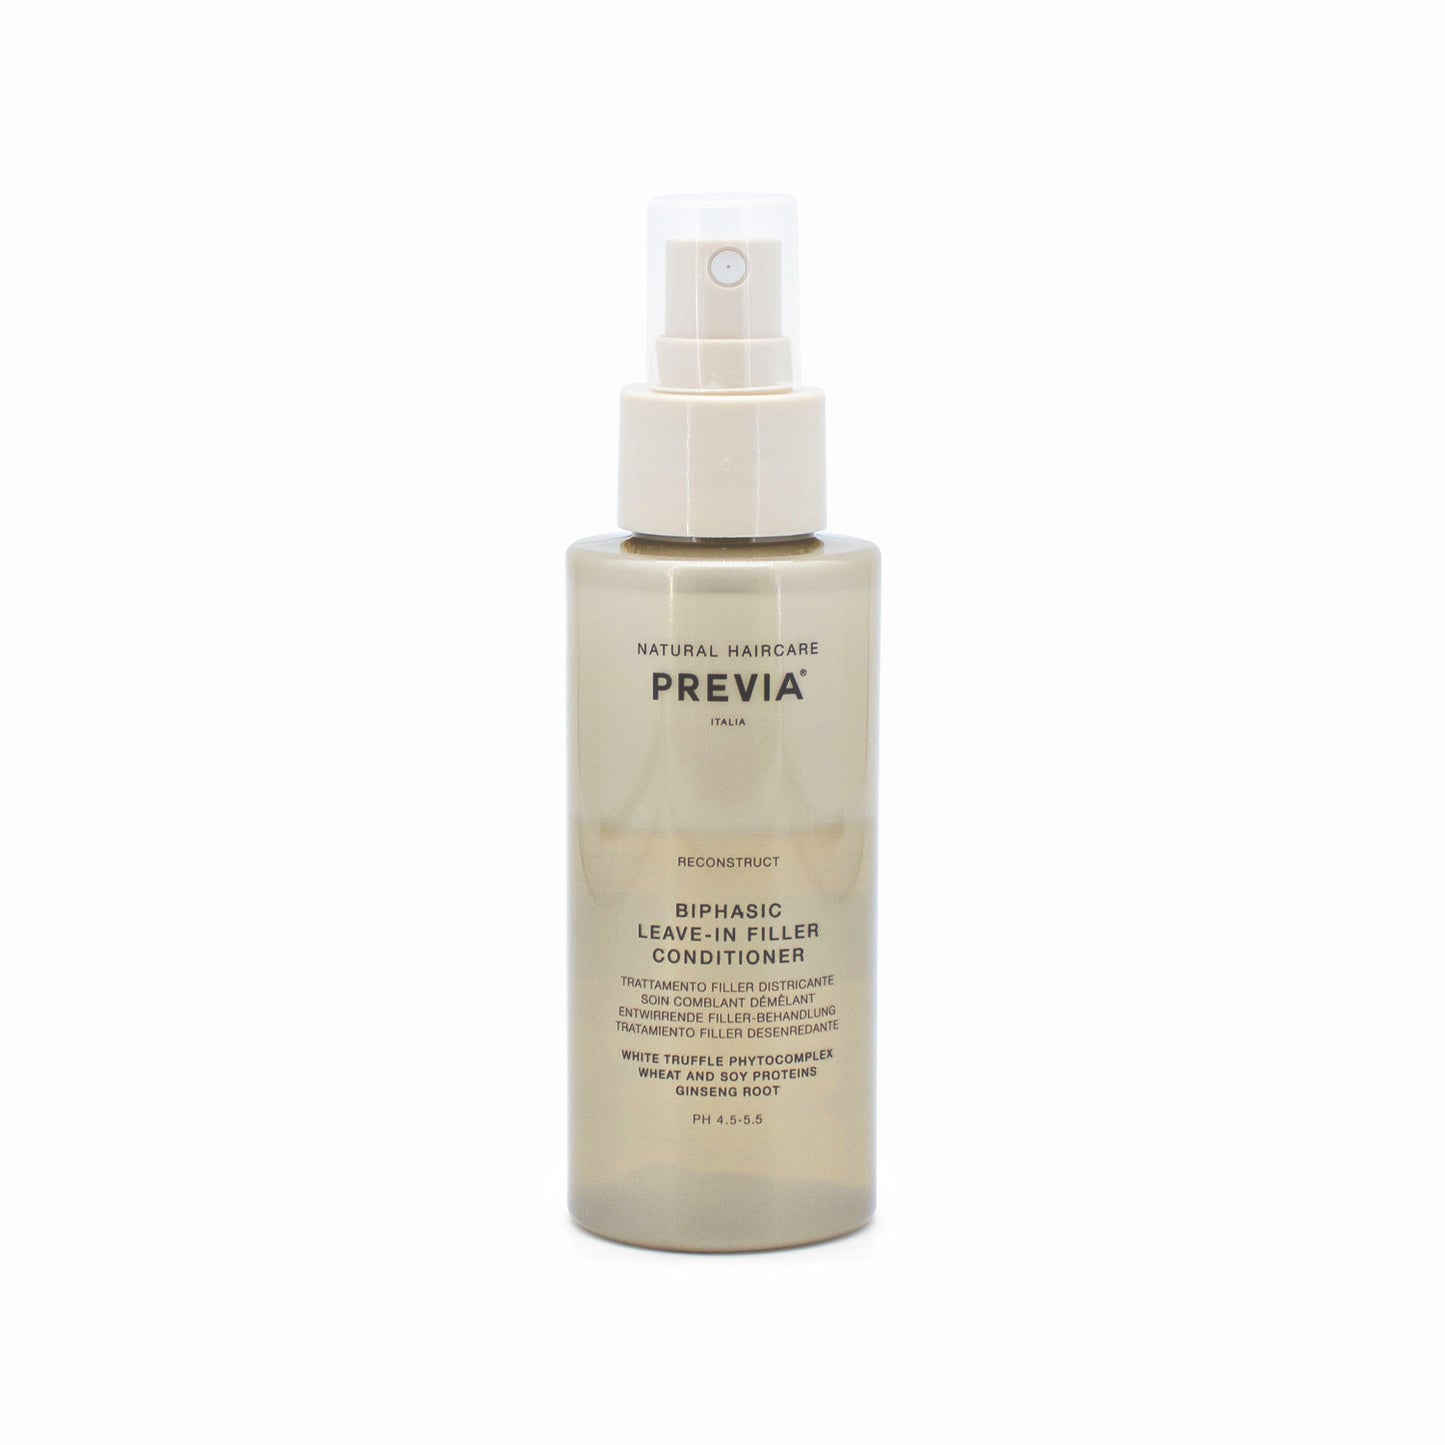 PREVIA Reconstruct Biphasic Leave-In Filler Treatment 3.38oz - New